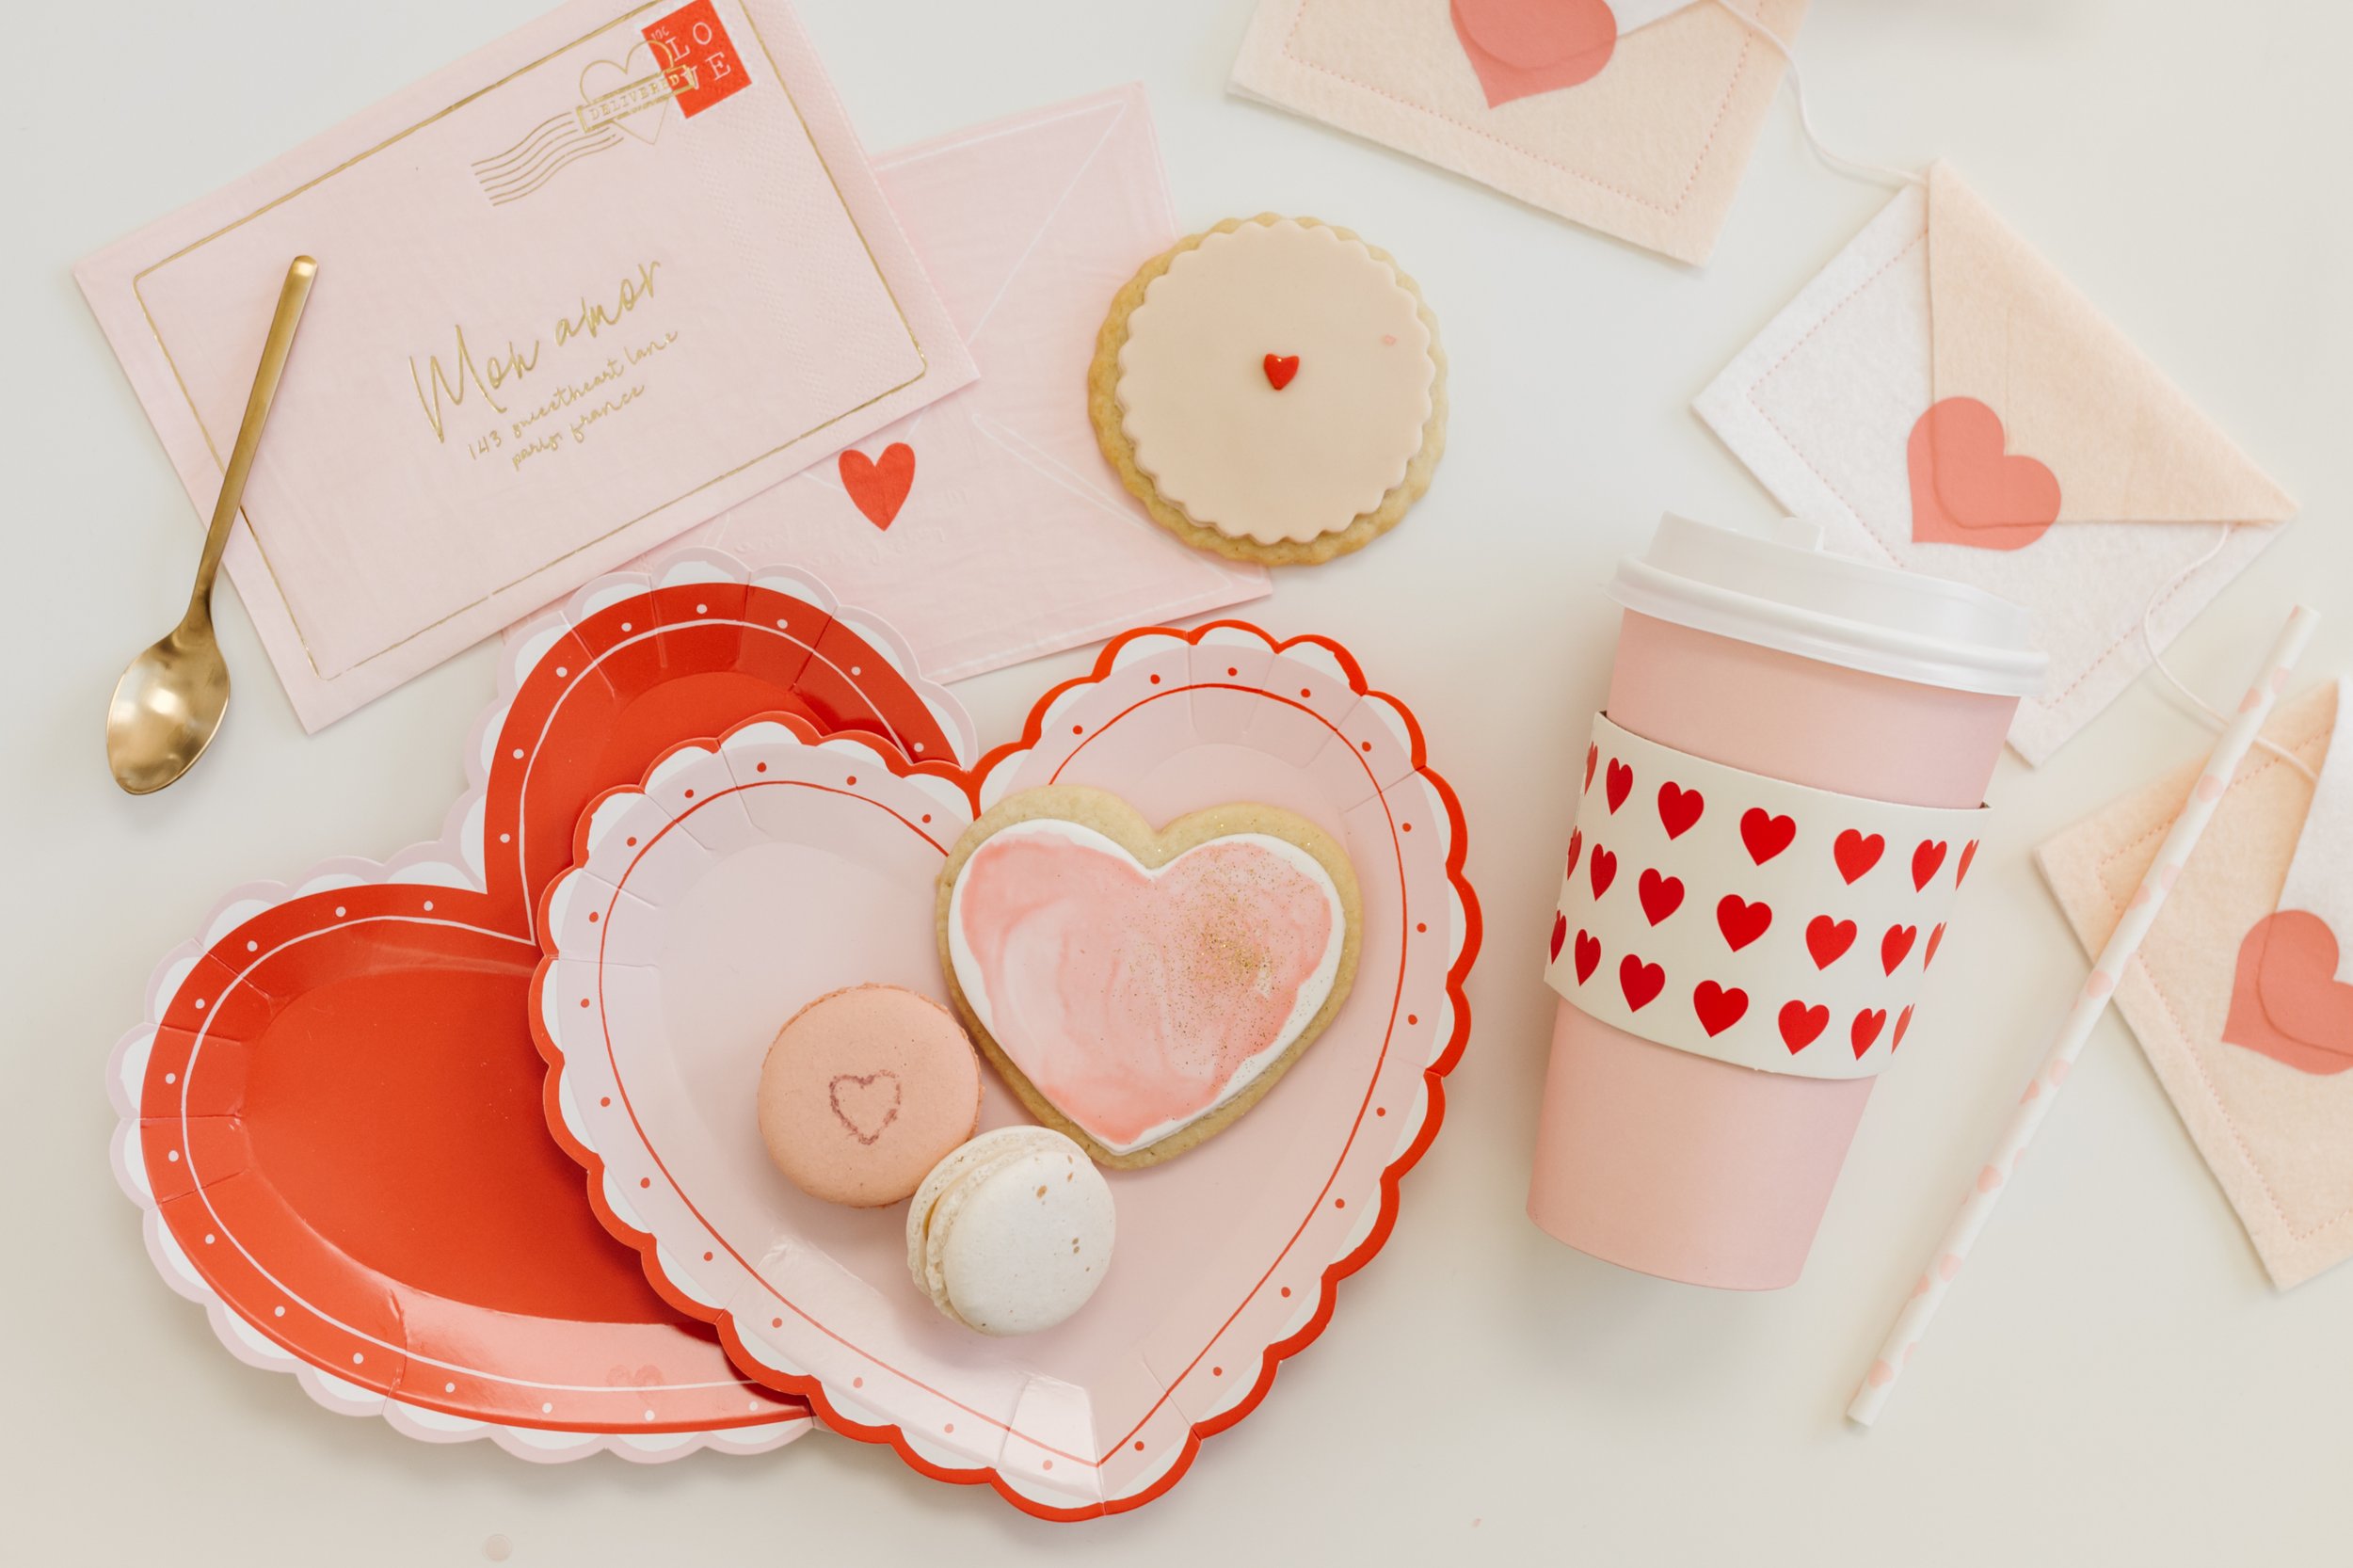   lacy heart plates   |   love note napkins   |   mini red hearts to-go cups   |   love note treat boxes   |   pink heart paper straws  